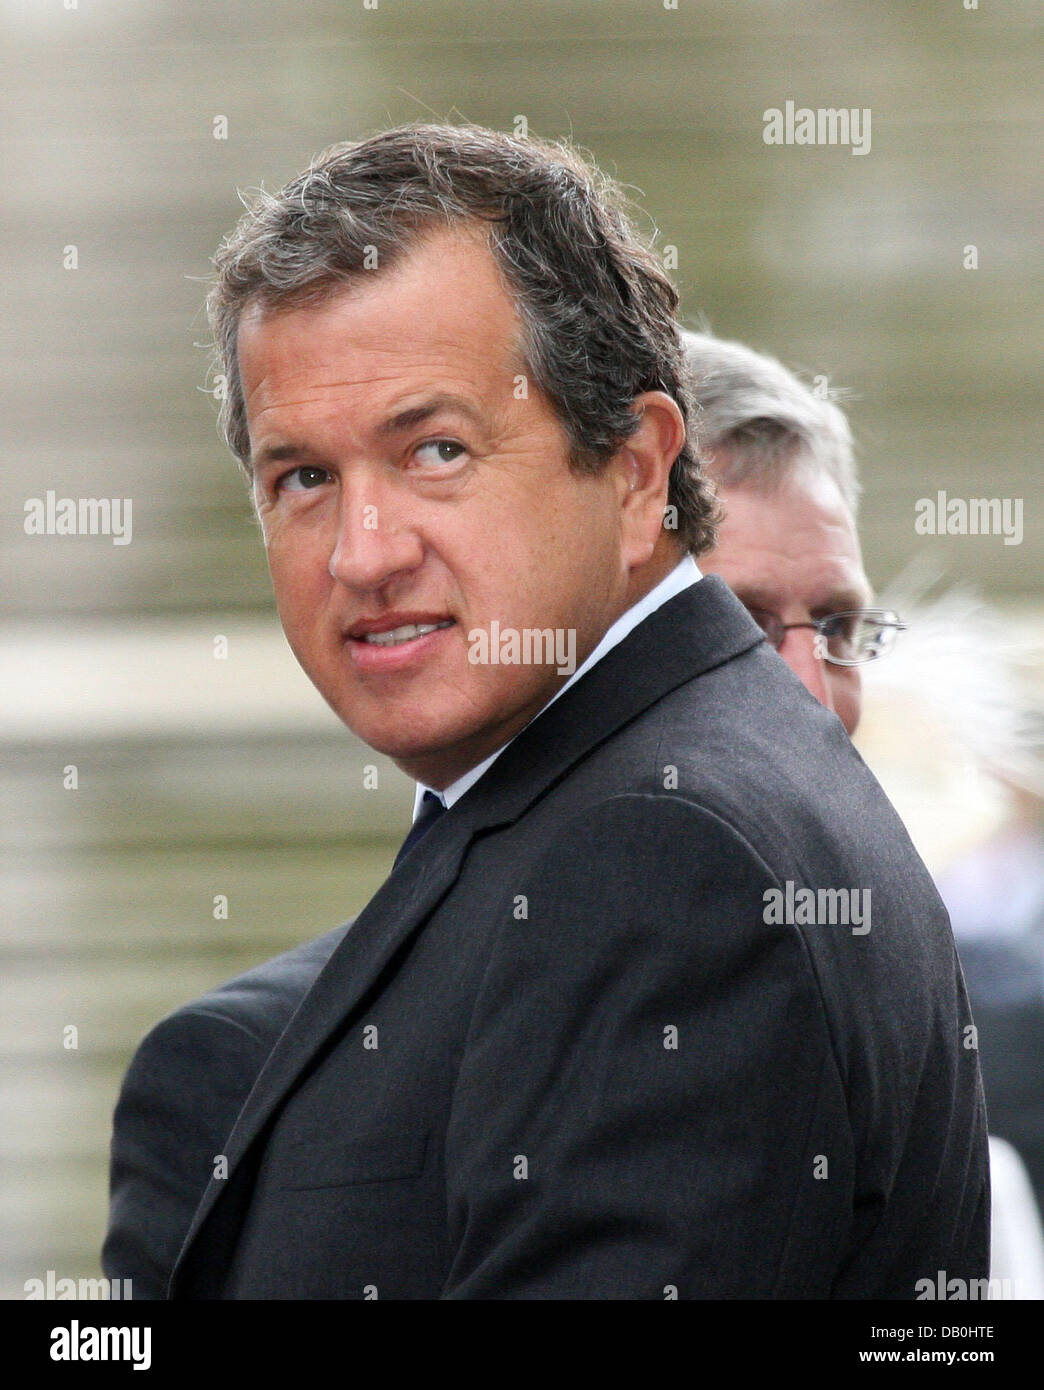 Celebrity photographer Mario Testino arrives for the Service of Thanksgiving for the life of Diana, Princess of Wales, at the Guards' Chapel in London, England, 31 August 2007. Prince William and Prince Harry organised the Thanksgiving Service to commemorate the life of their mother on the tenth anniversary of her death. Photo: Albert Nieboer (ATTENTION: NETHERLANDS OUT) Stock Photo